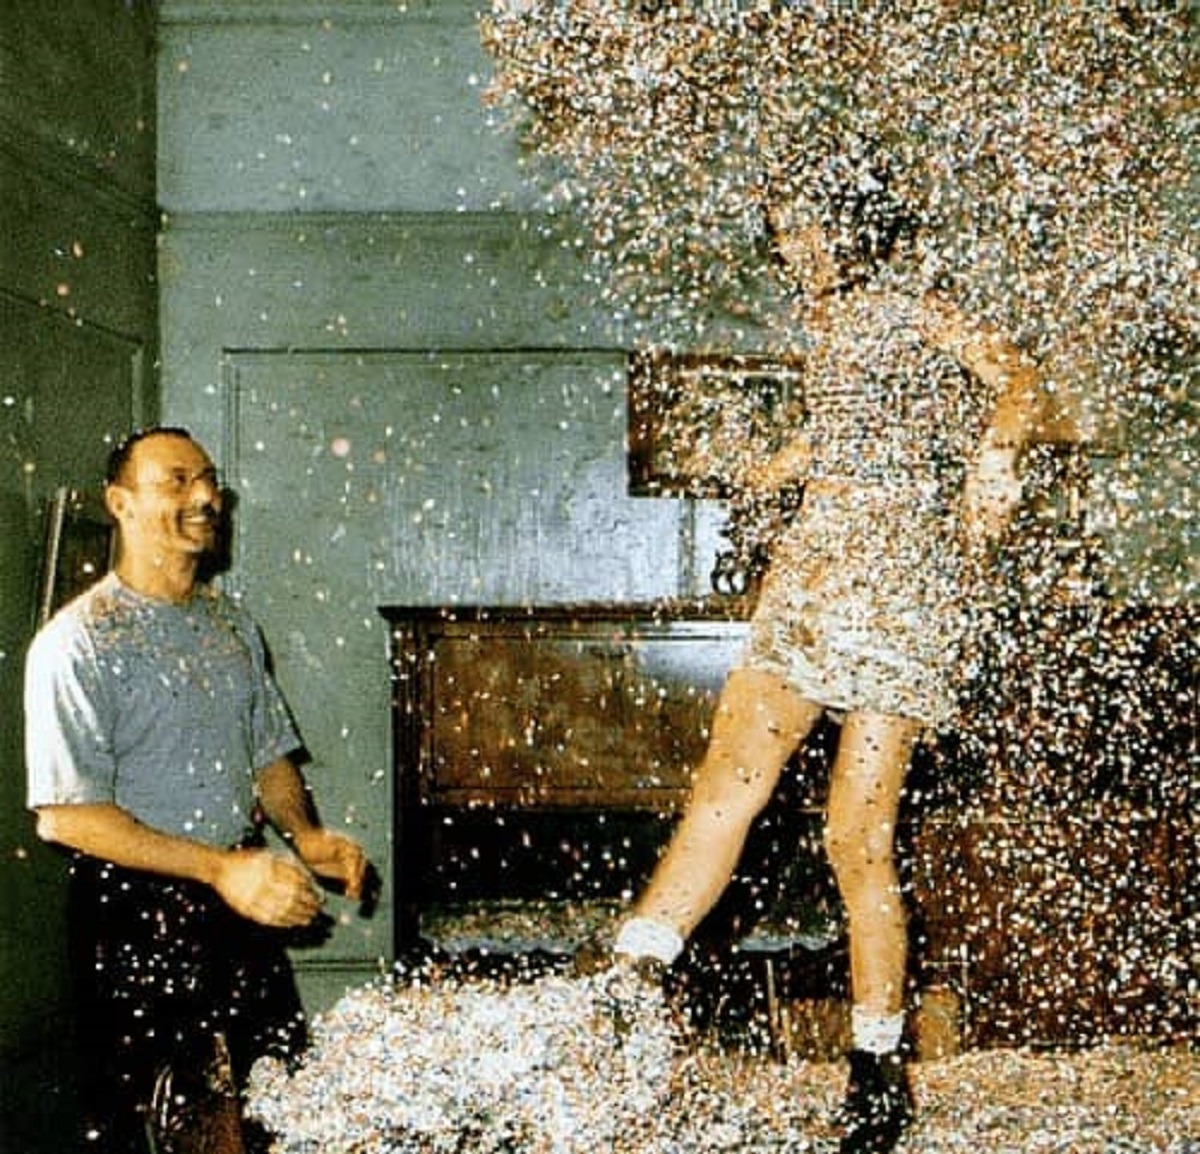 Jean Reno and Natalie Portman goof off with confetti to celebrate the end of filming Léon: The Professional in 1994.